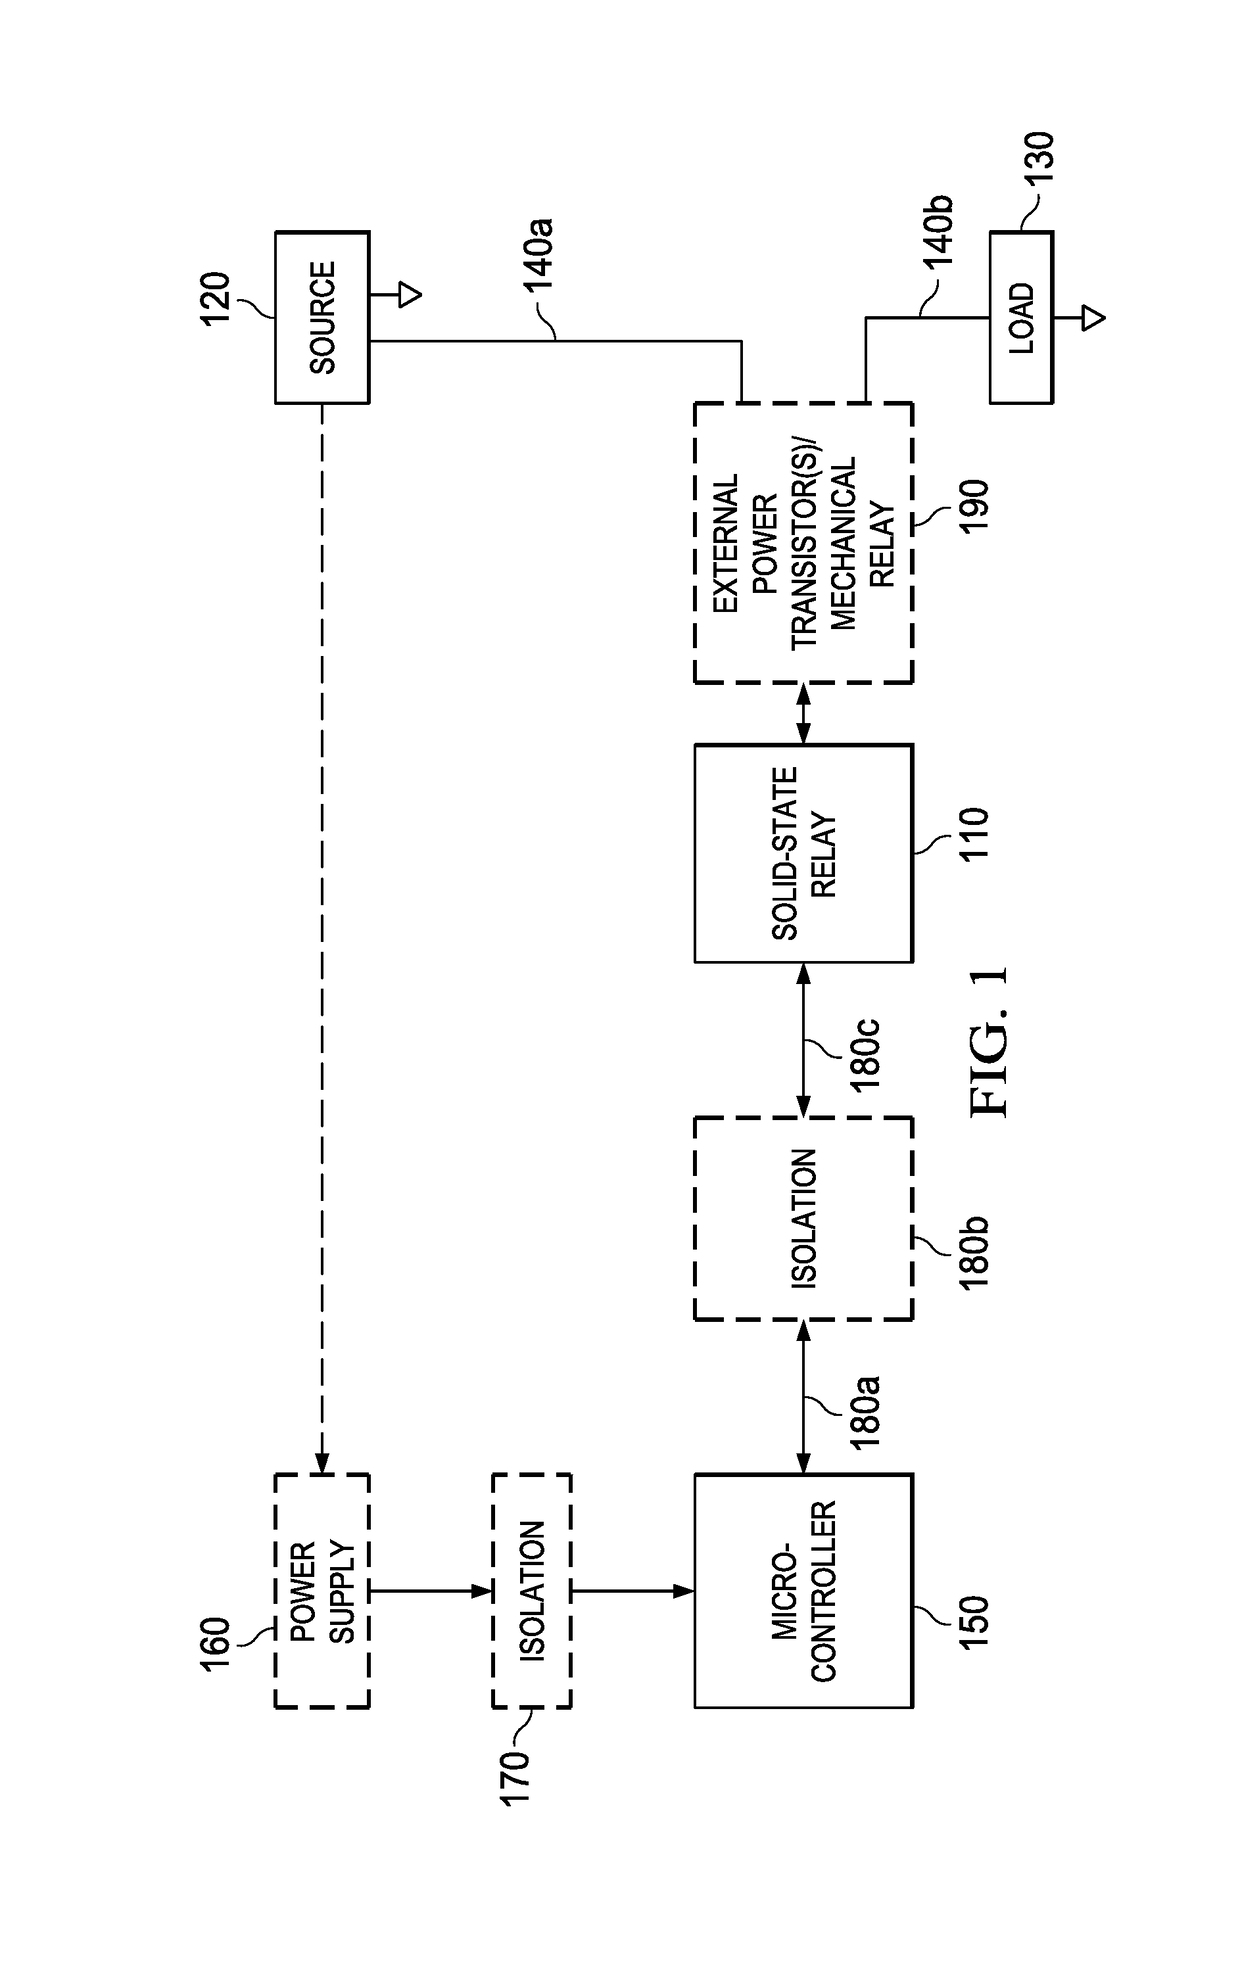 Circuits and methods for providing power and data communication in isolated system architectures